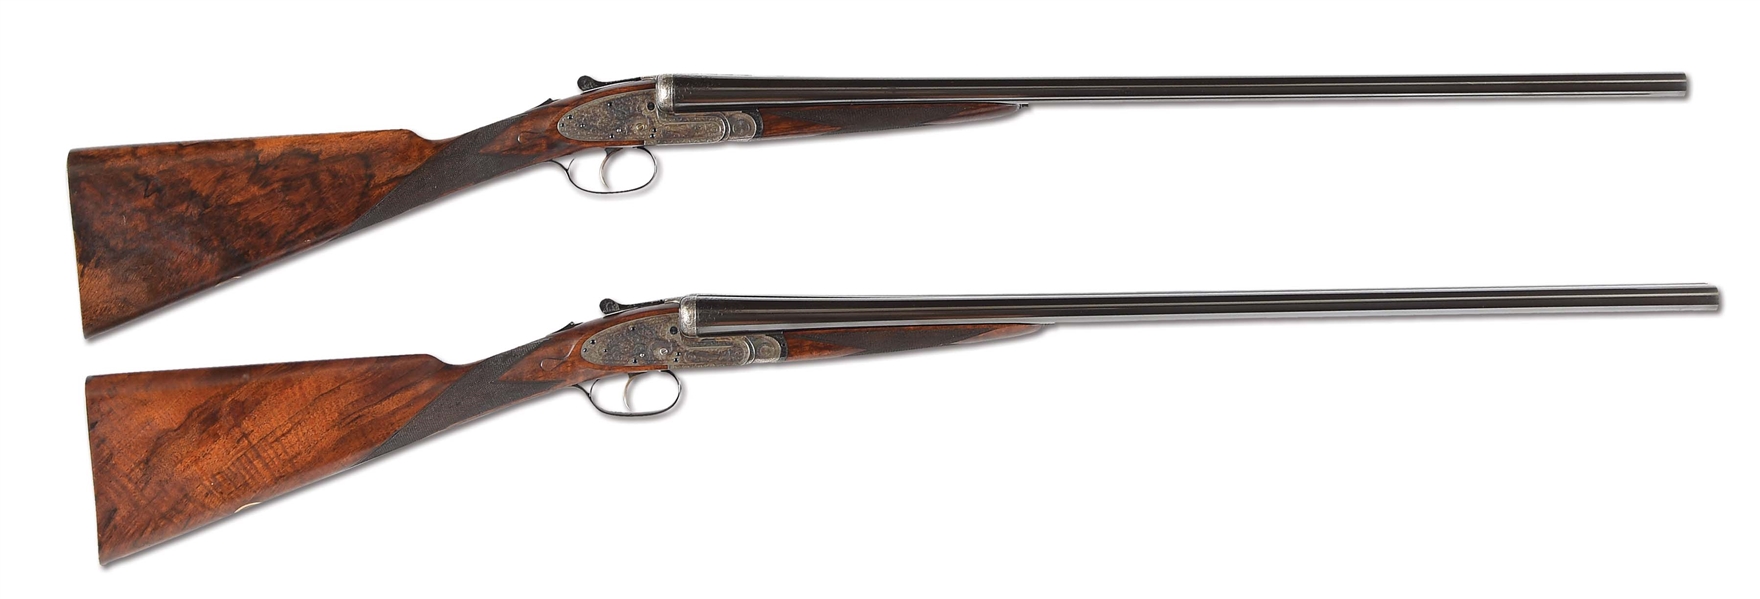 (C) LOVELY PAIR OF 16 GAUGE CHURCHILL "PREMIERE" LONG BARRELED EASY OPENING, SIDELOCK EJECTOR, SELECTIVE SINGLE TRIGGER SHOTGUNS IN THEIR ORIGINAL VC 2-GUN CASE WITH ACCESSORIES